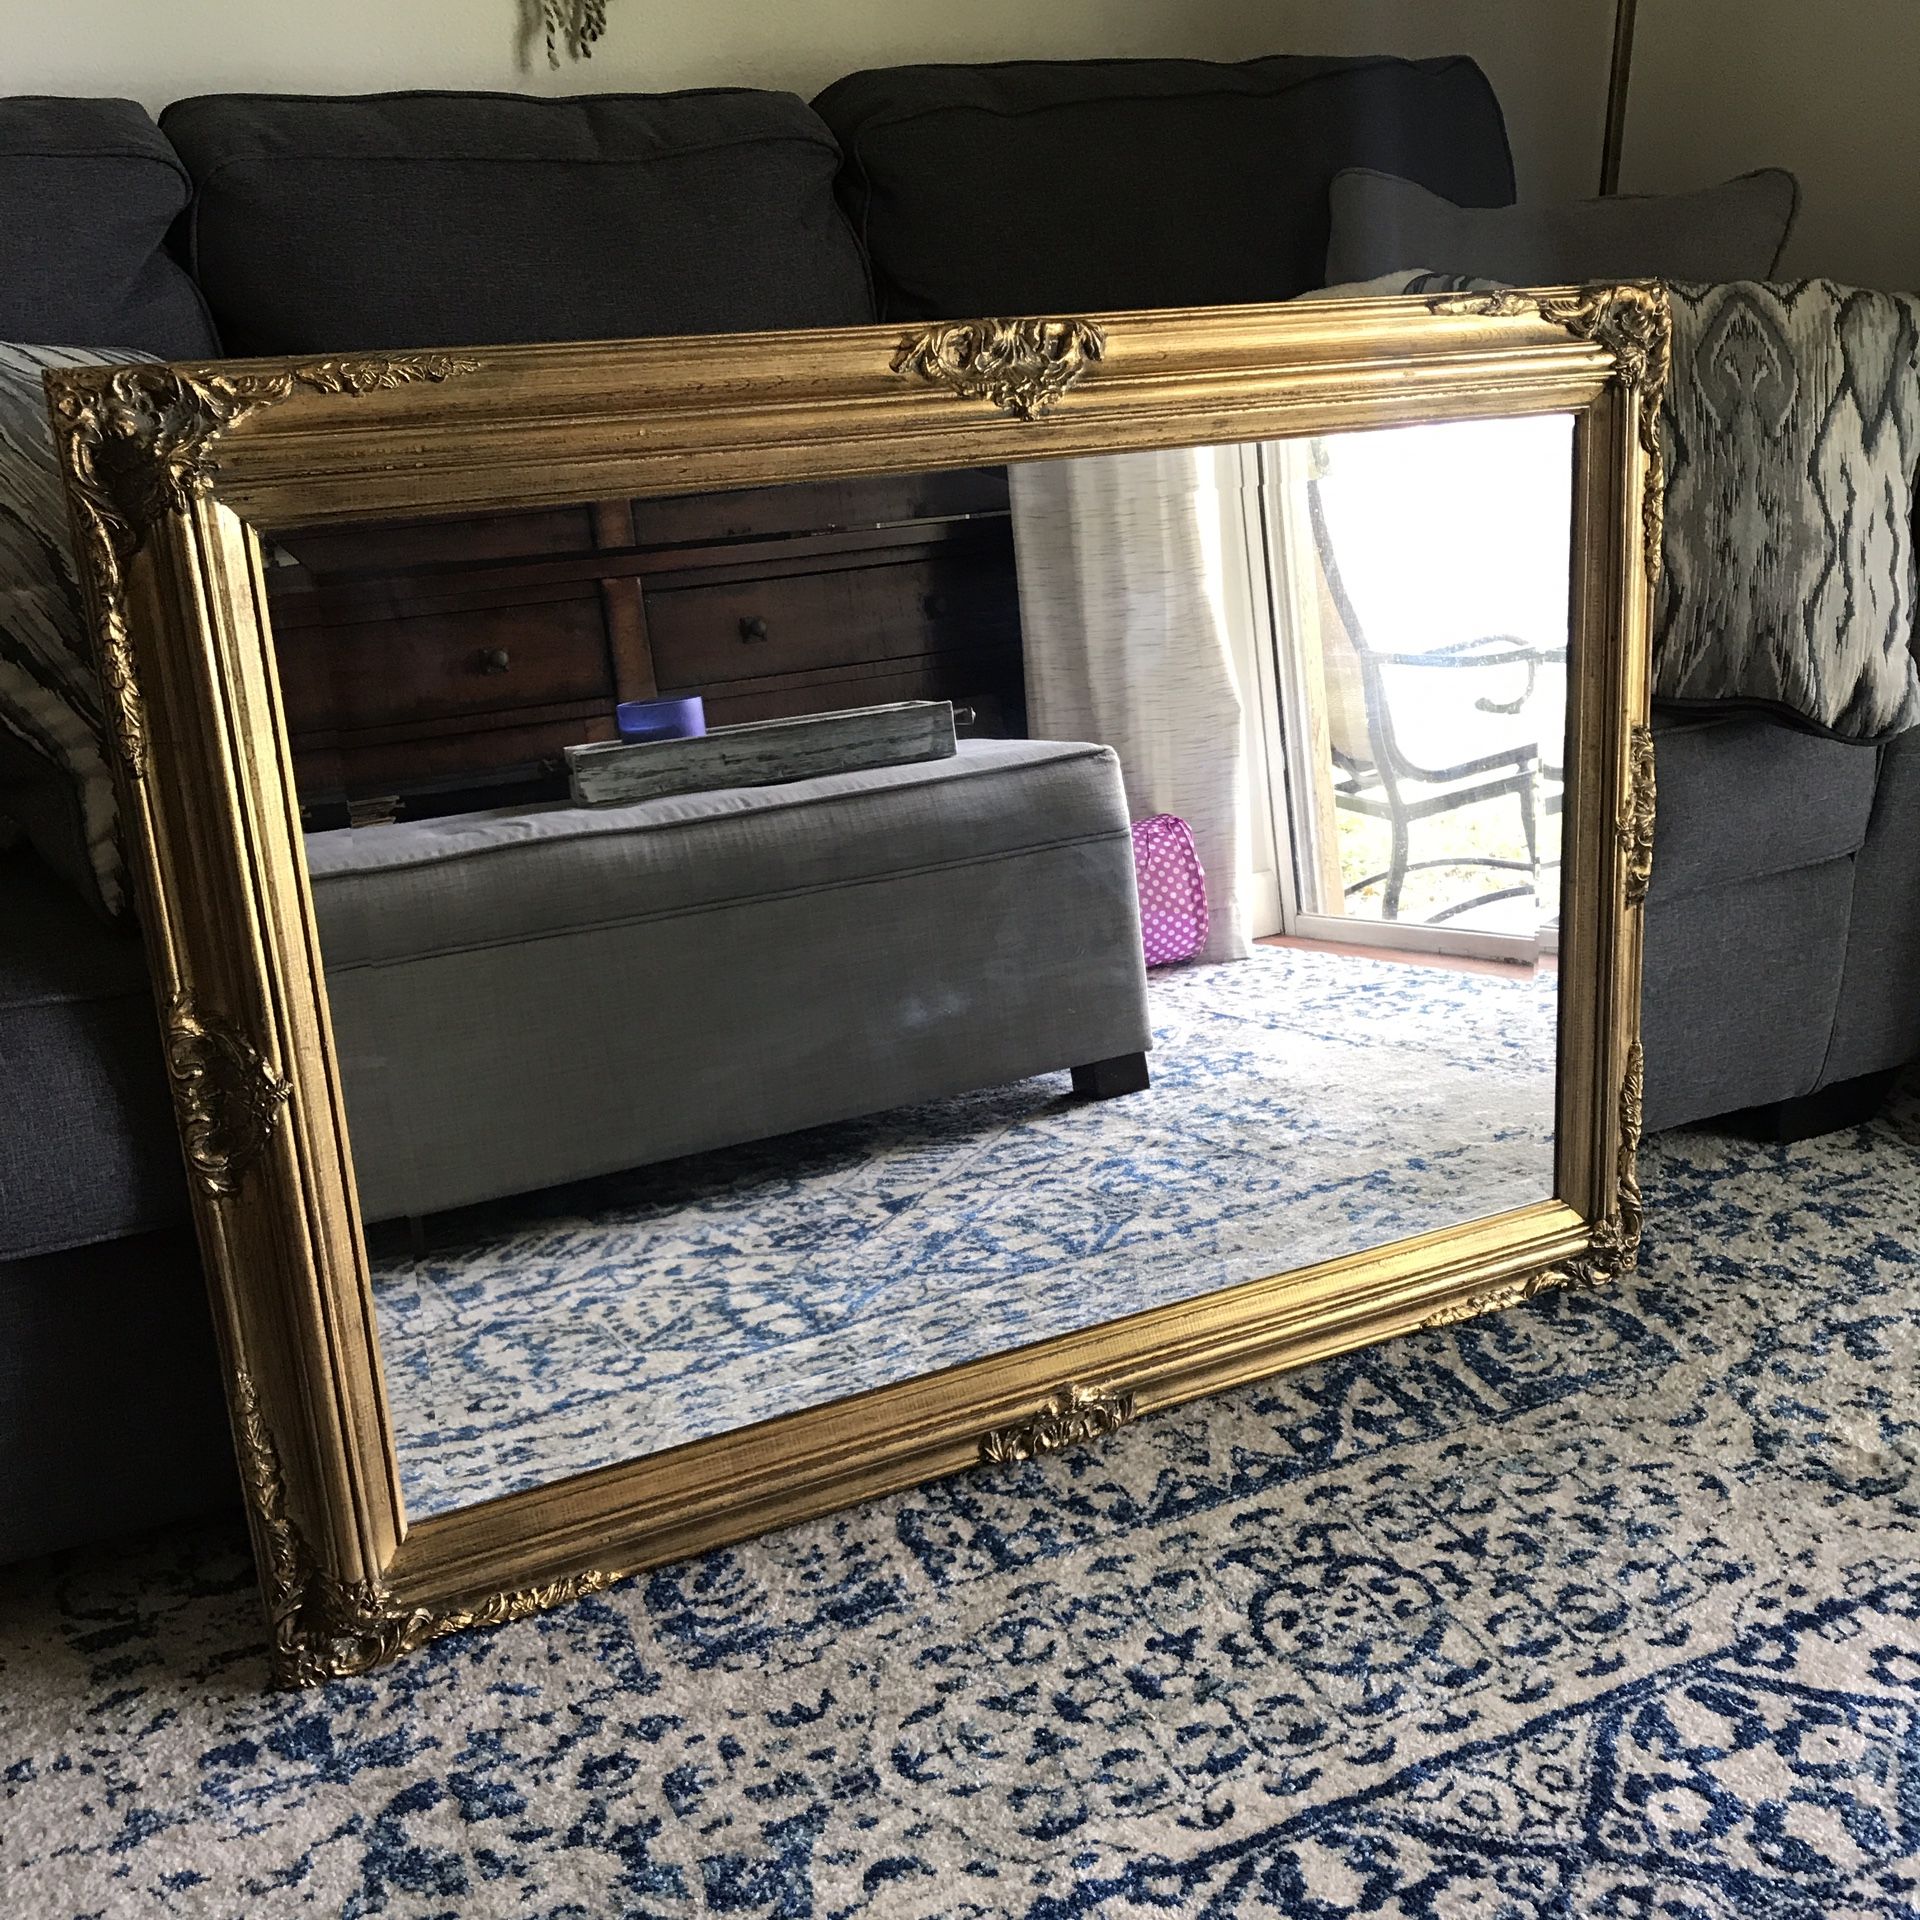 Antique/Vintage Gold Intricate Mirror from the Home Advantage